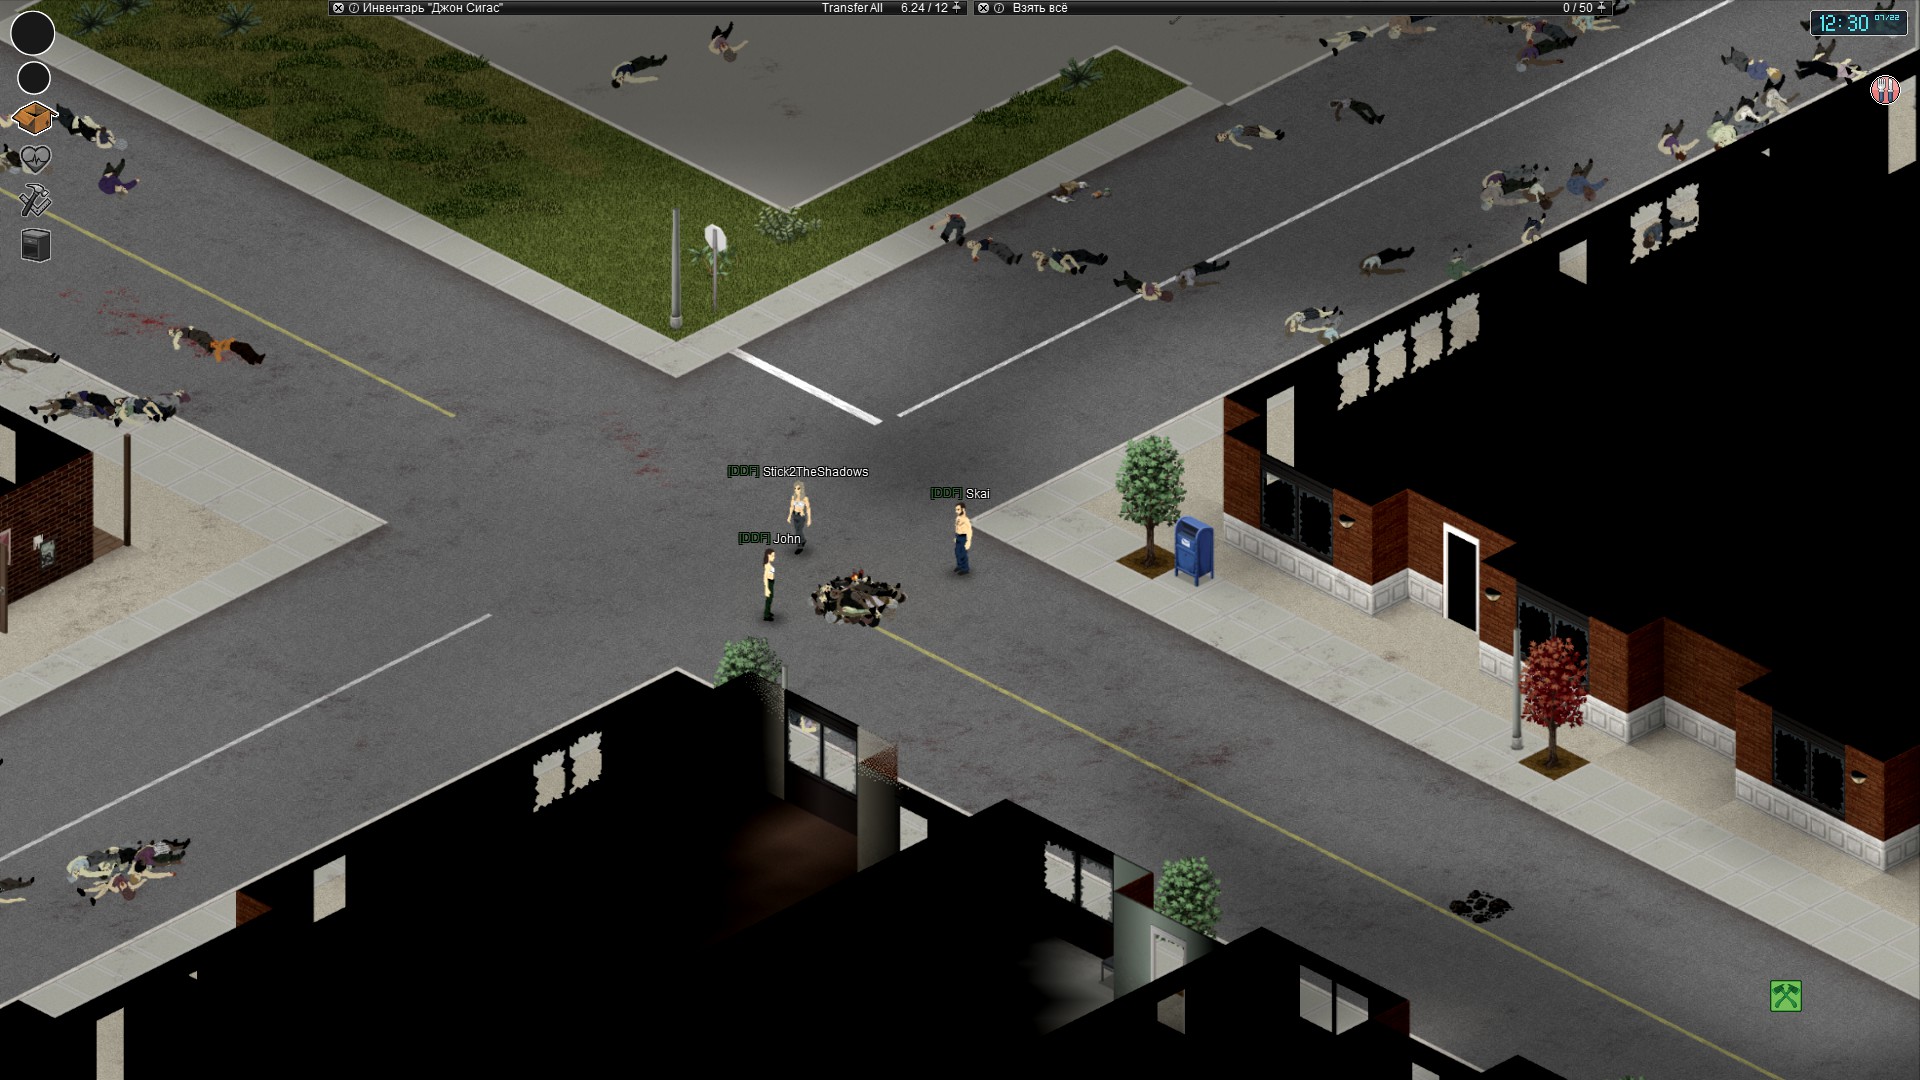 download free project zomboid